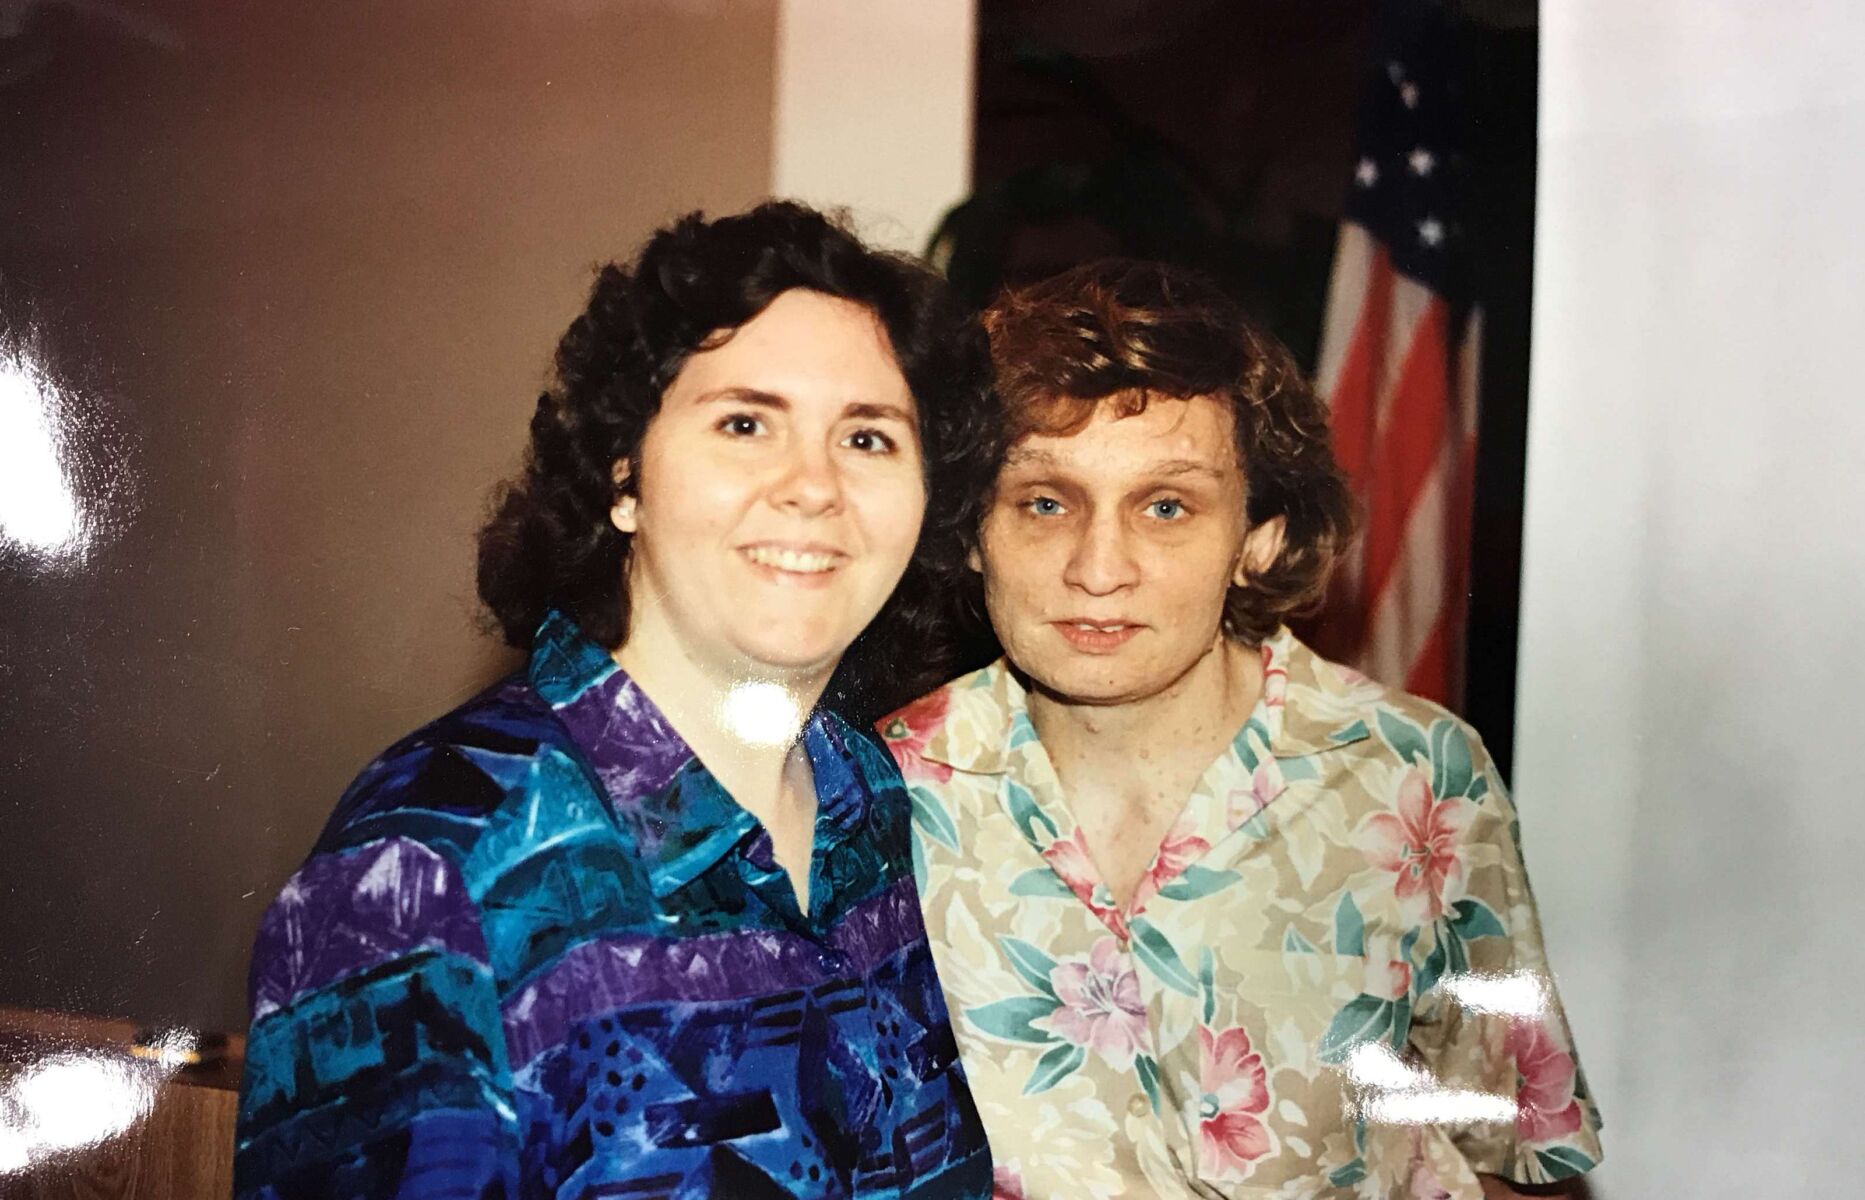 Two people are standing close together and smiling. They are both wearing patterned shirts. An American flag is partially visible in the background.